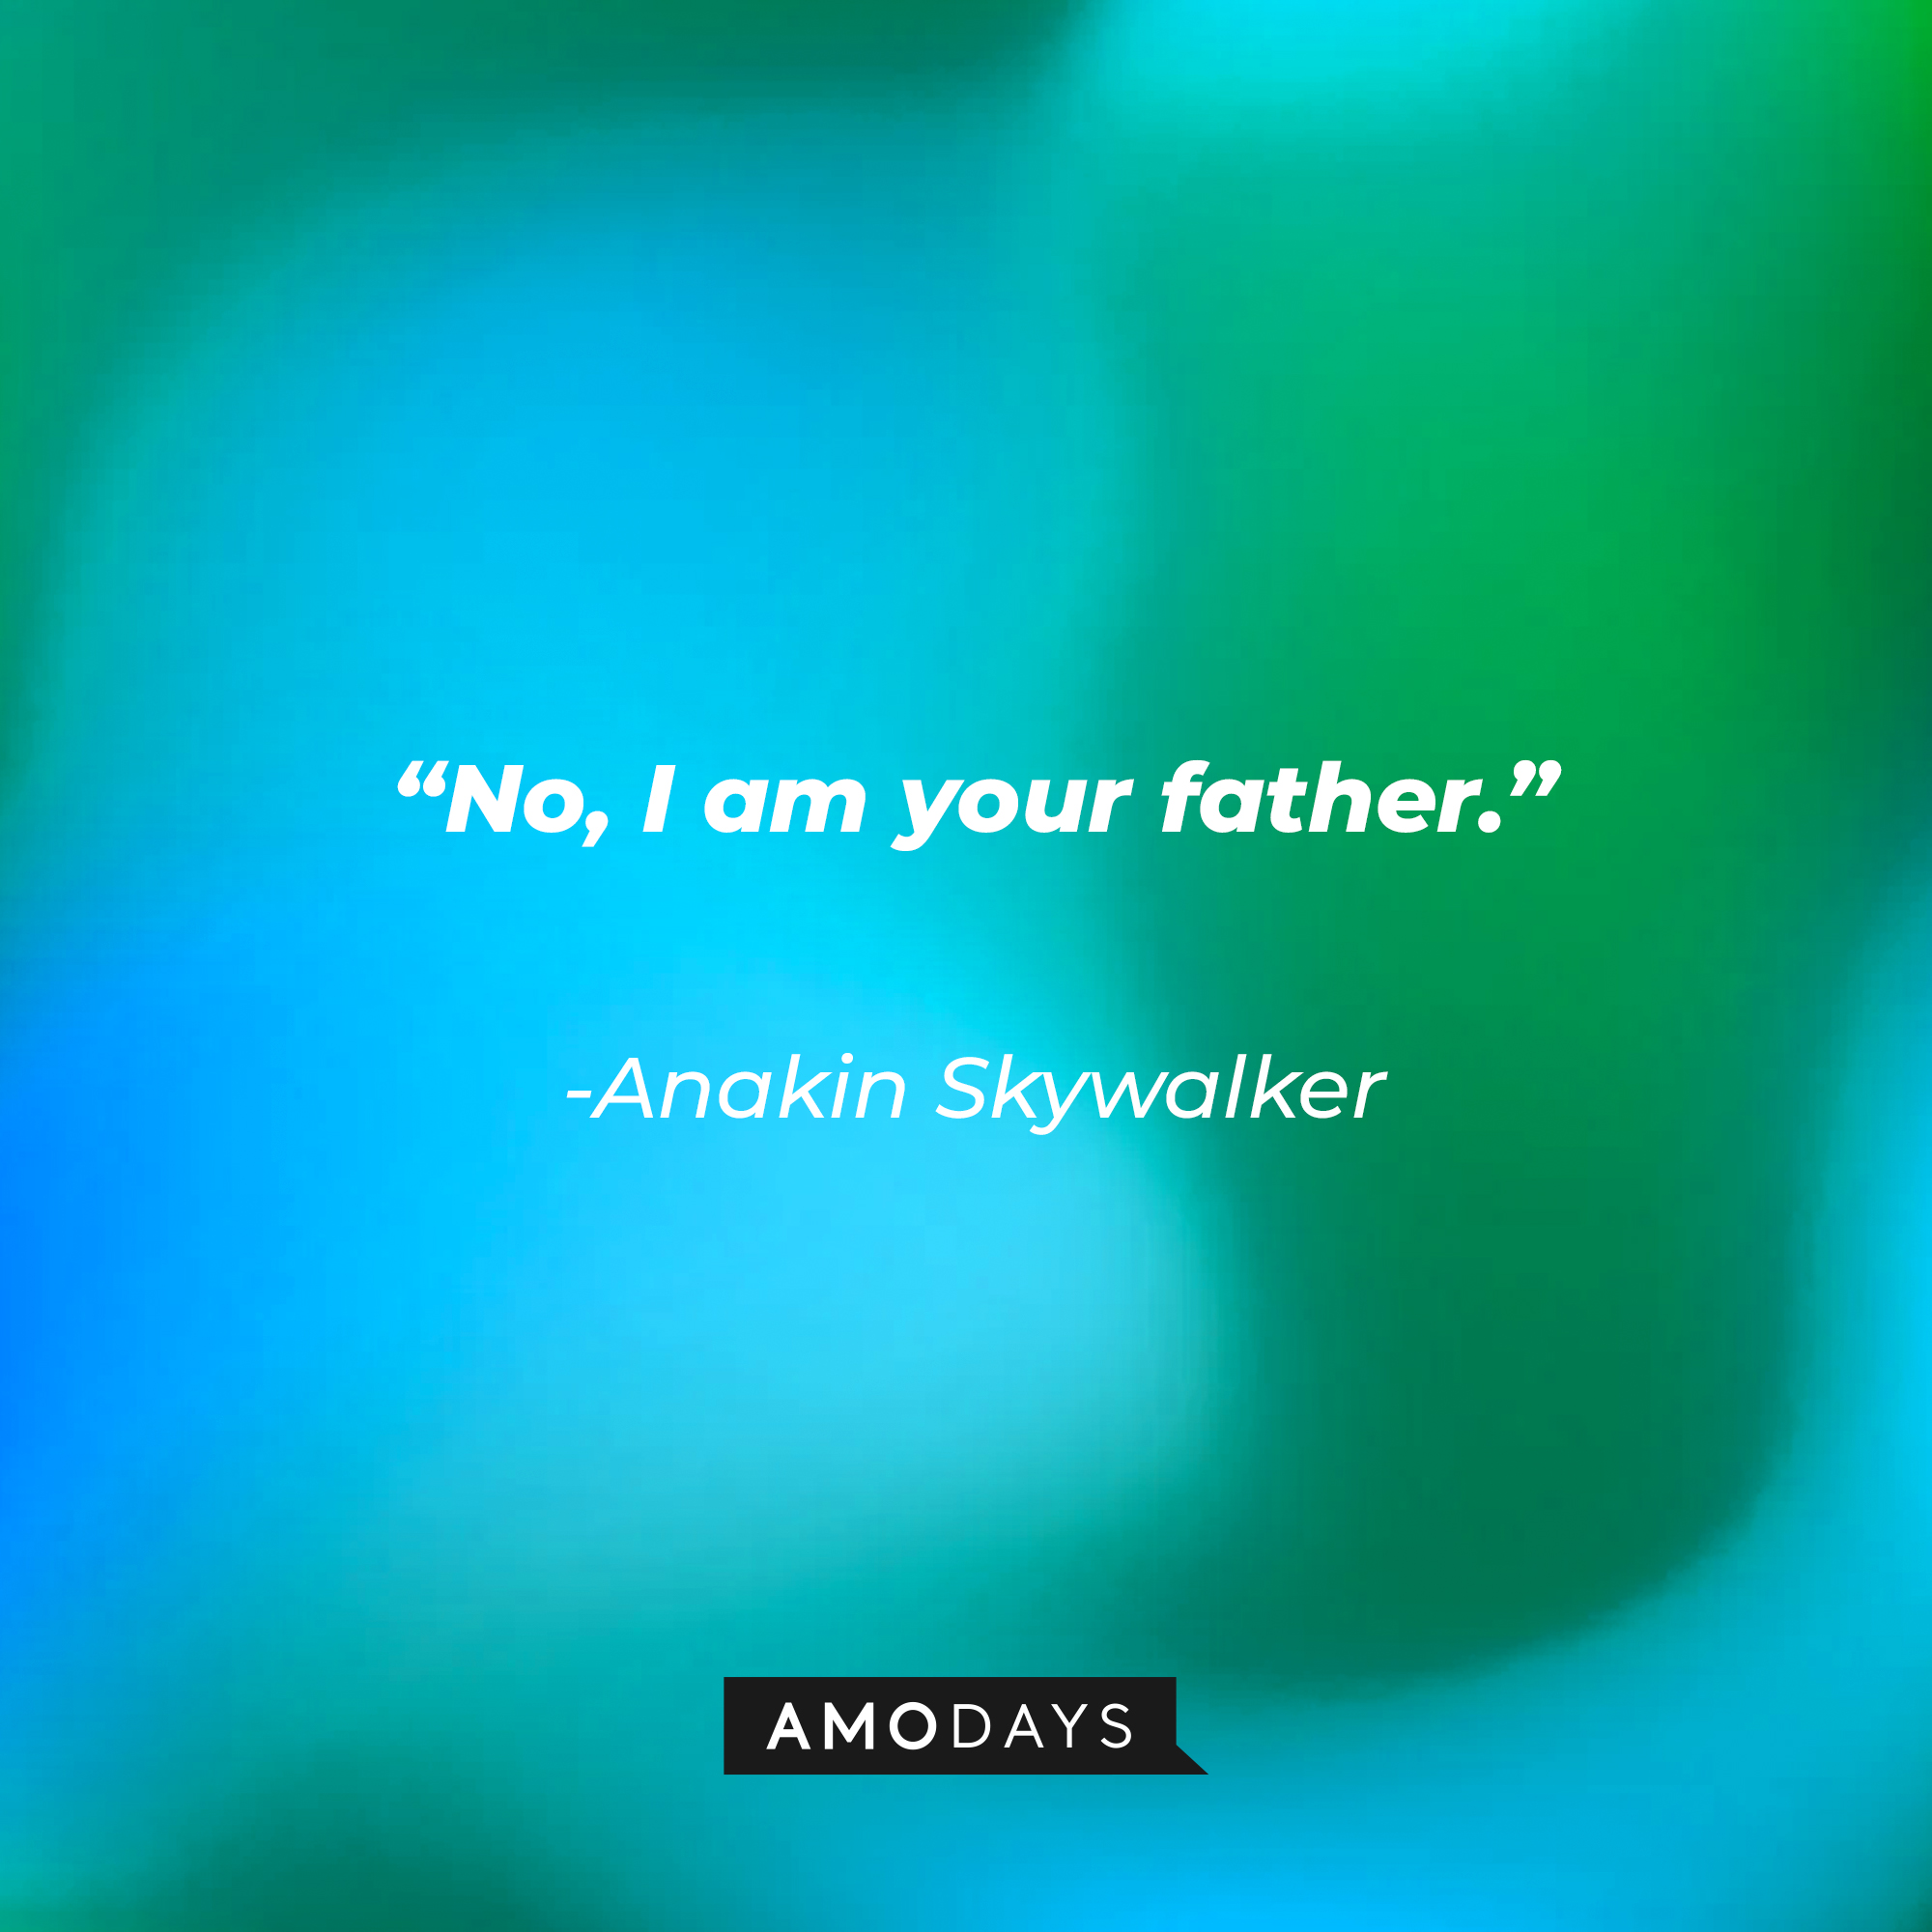 Anakin Skywalker’s quote: “No, I am your father.” | Source: AmoDays